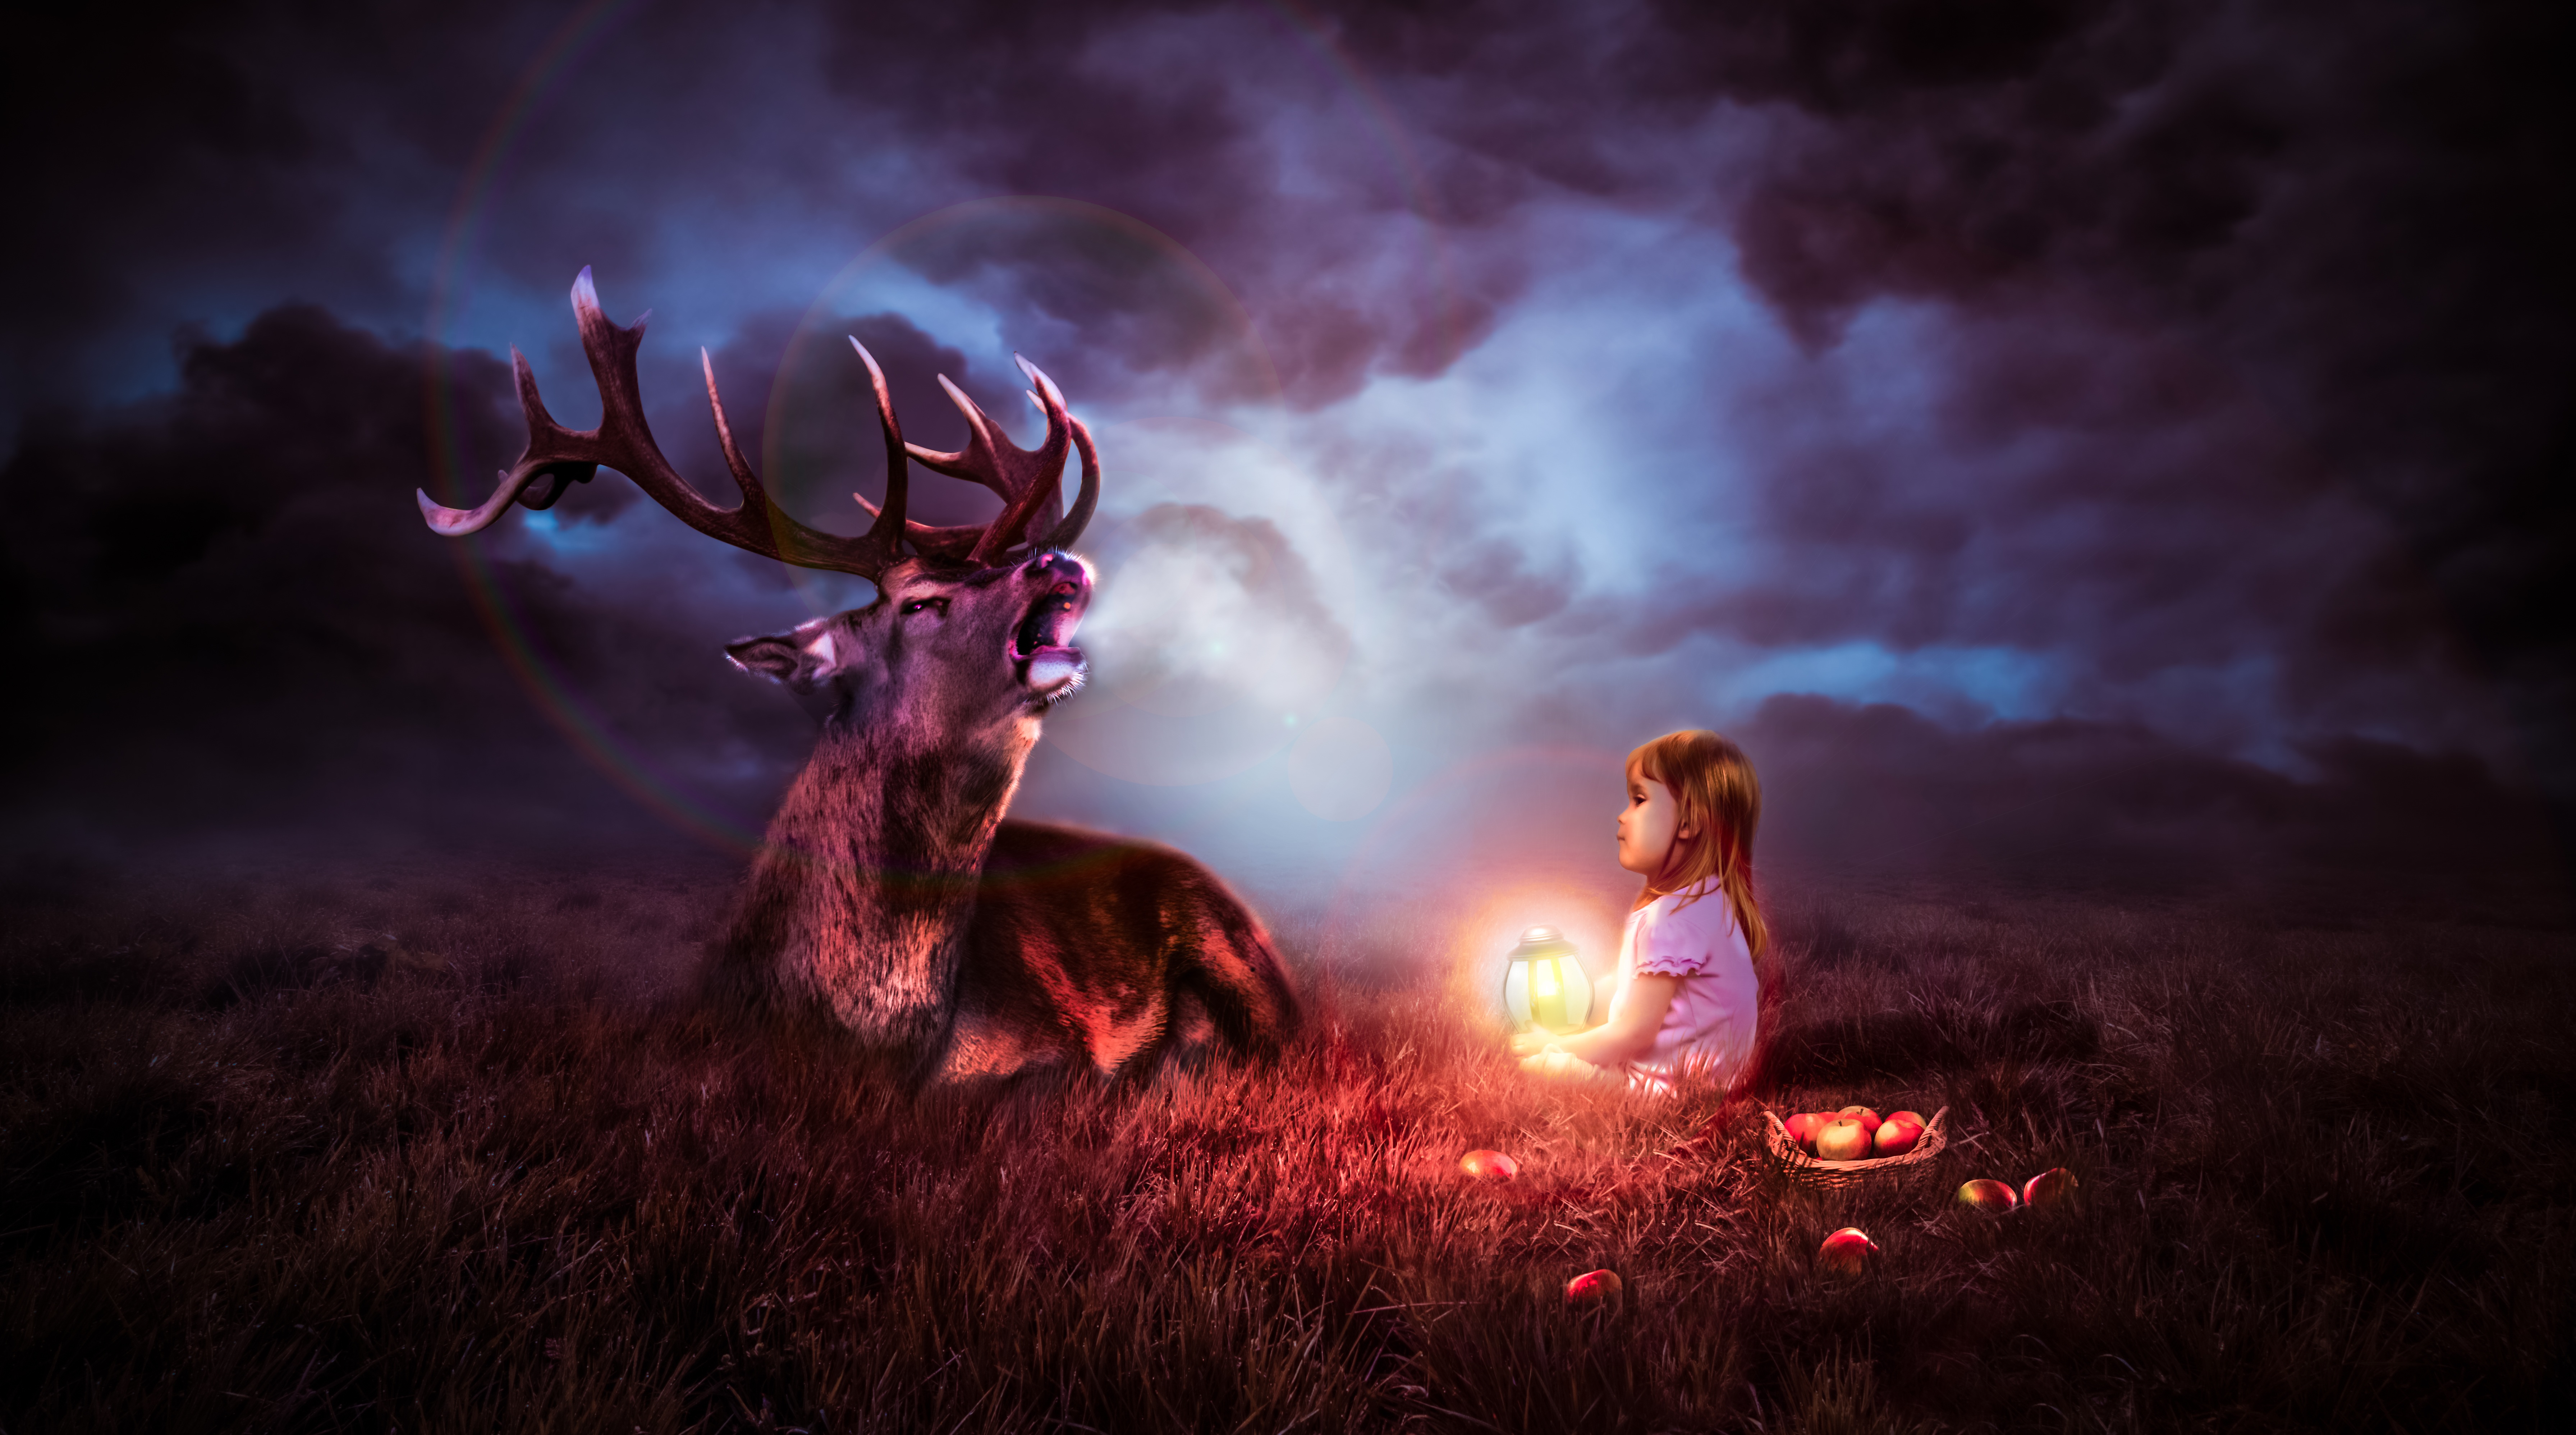 Night sky deer fantasy k hd artist k wallpapers images backgrounds photos and pictures